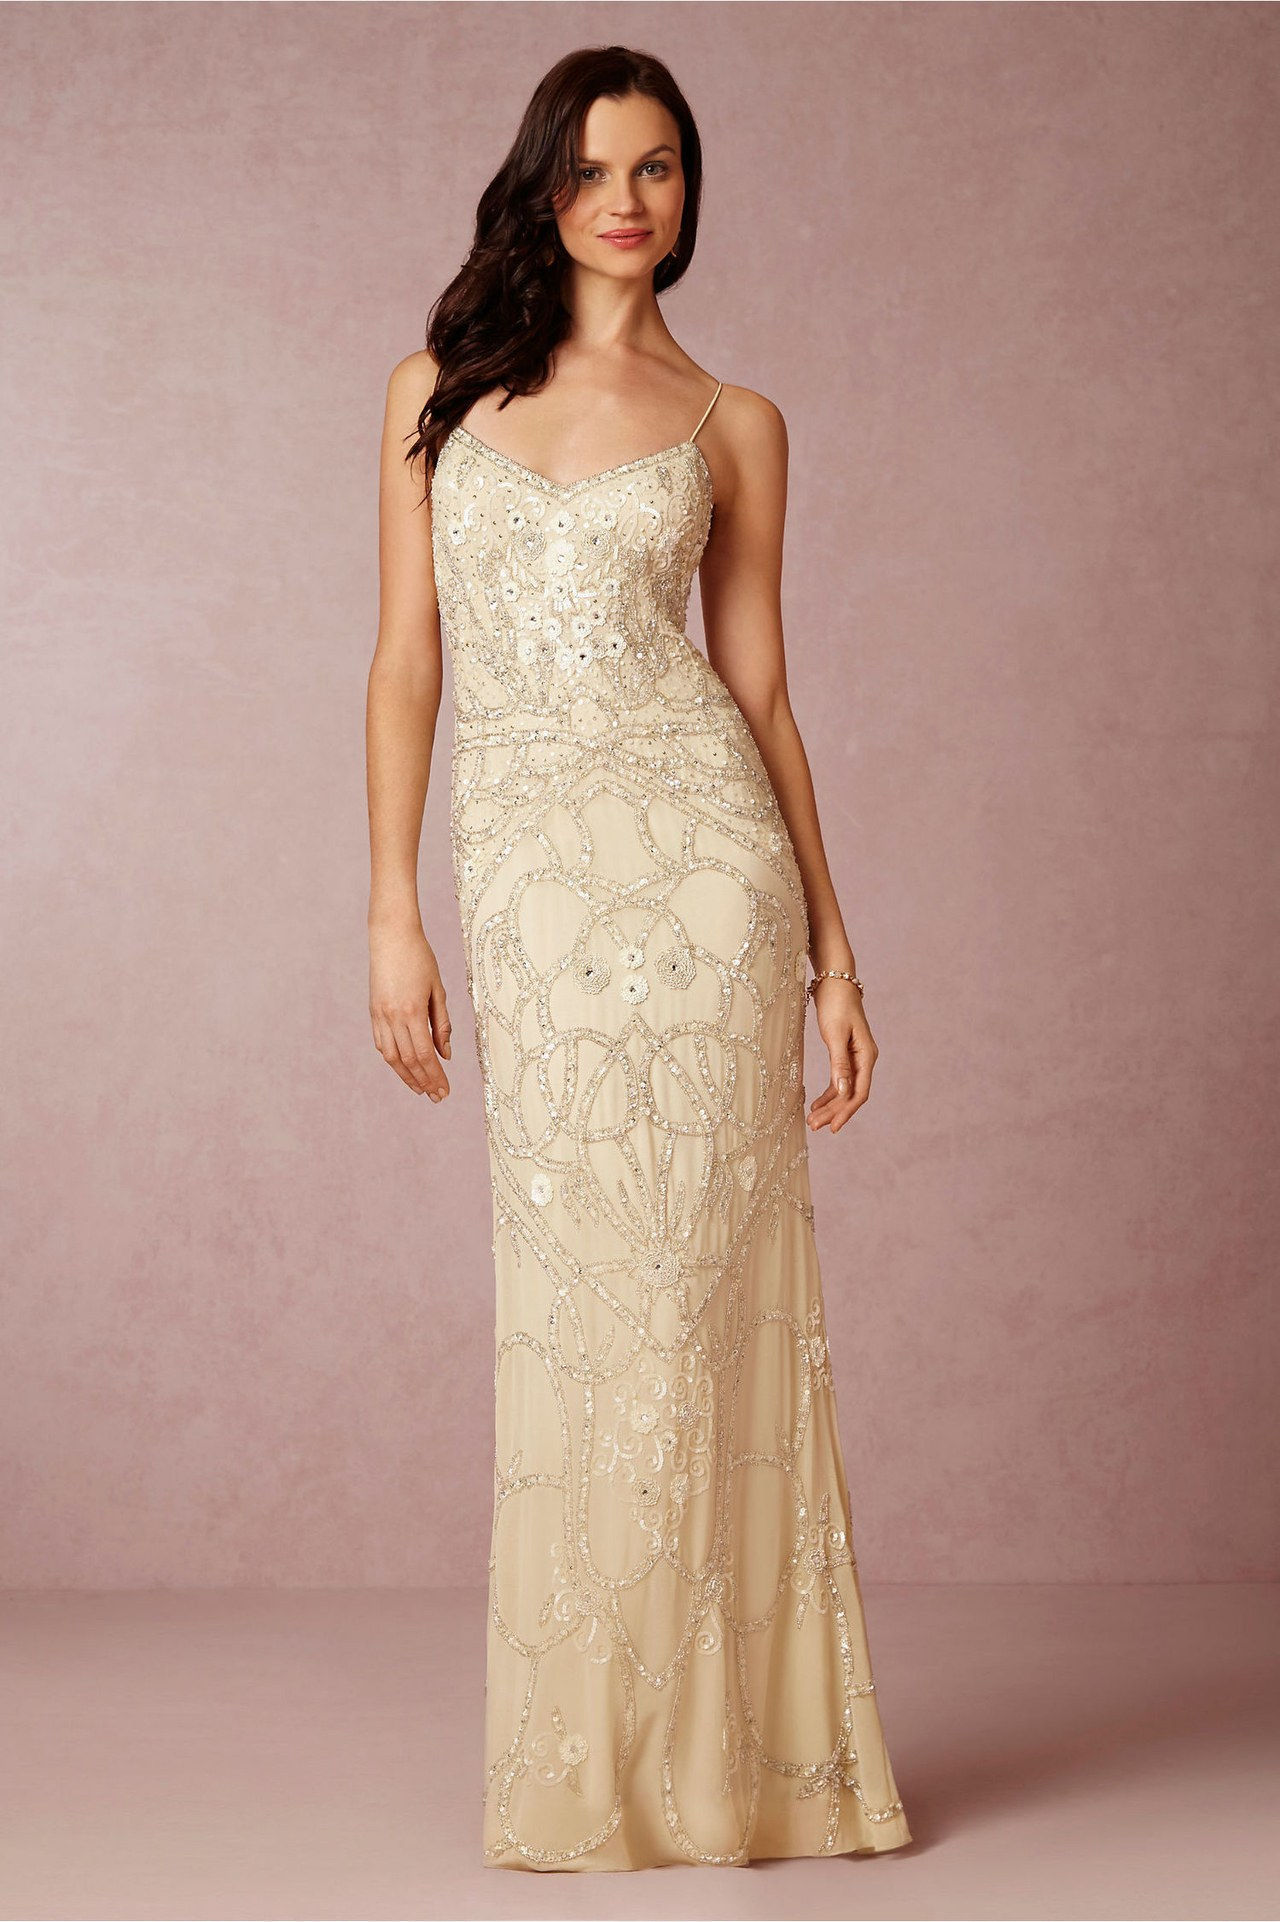 3A 2 in 1 wedding dresses wedding gowns mix and match wedding dresses bhldn 0430 courtesy